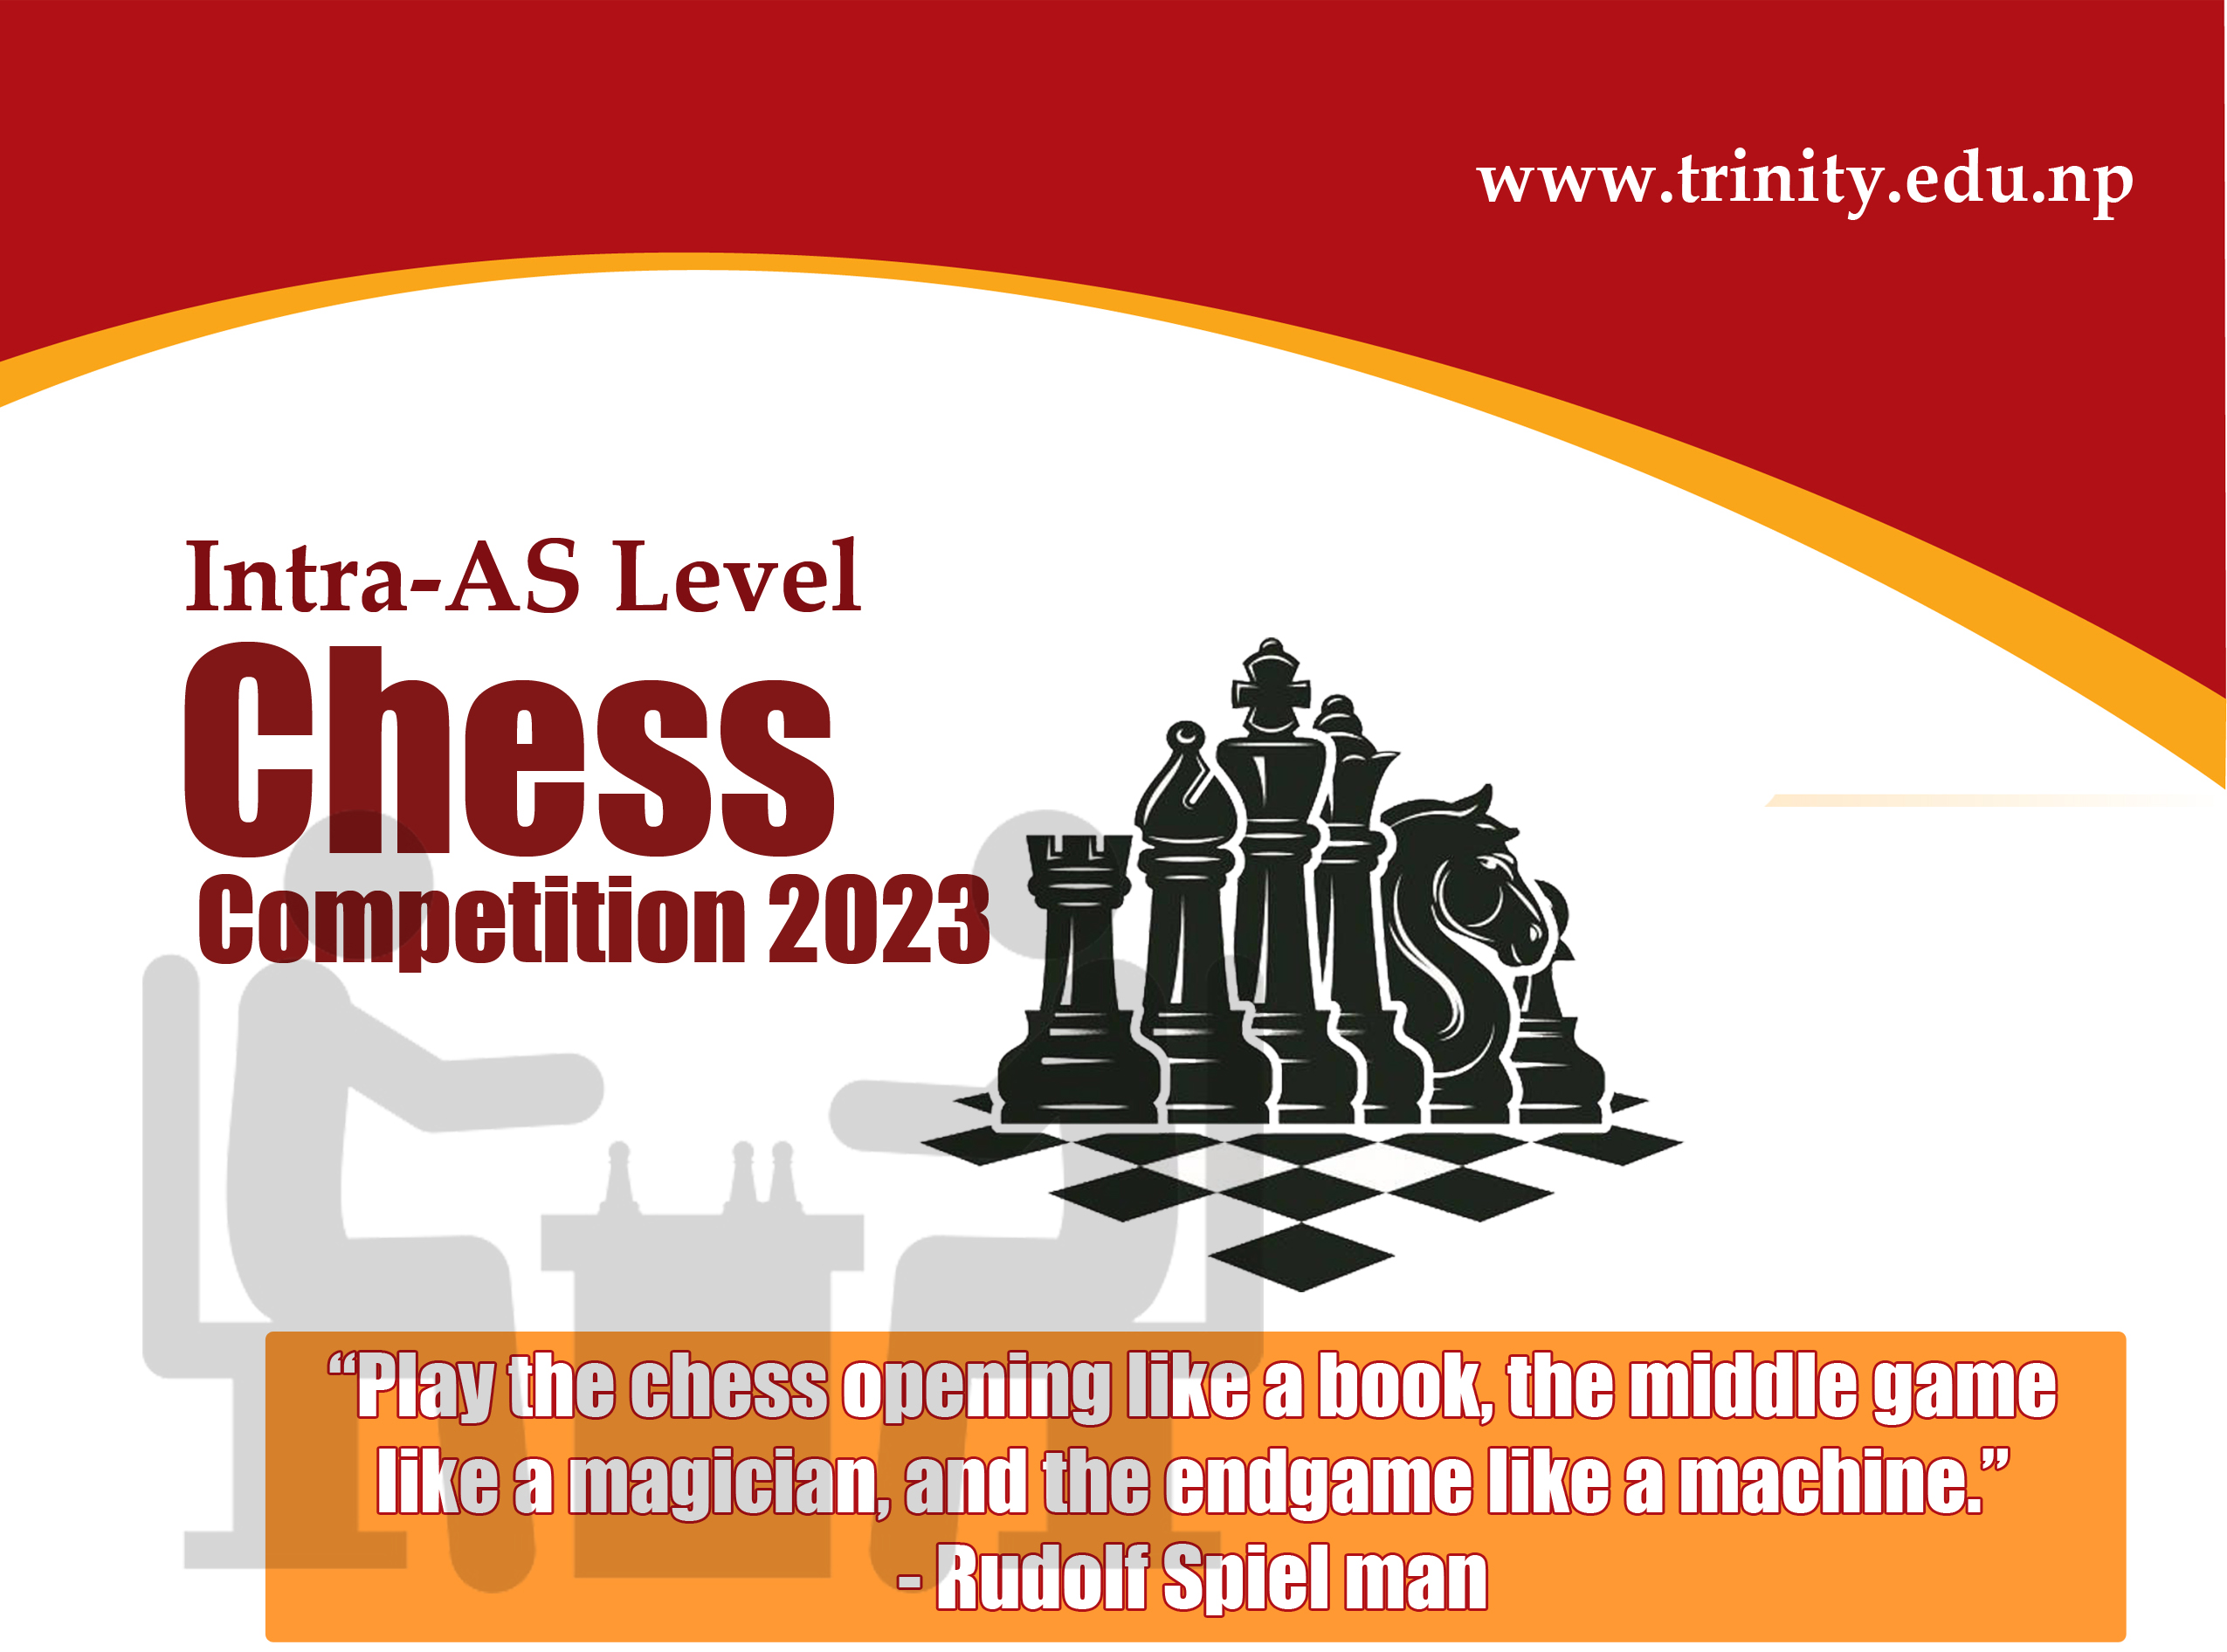 Intra-AS Level Chess Competition